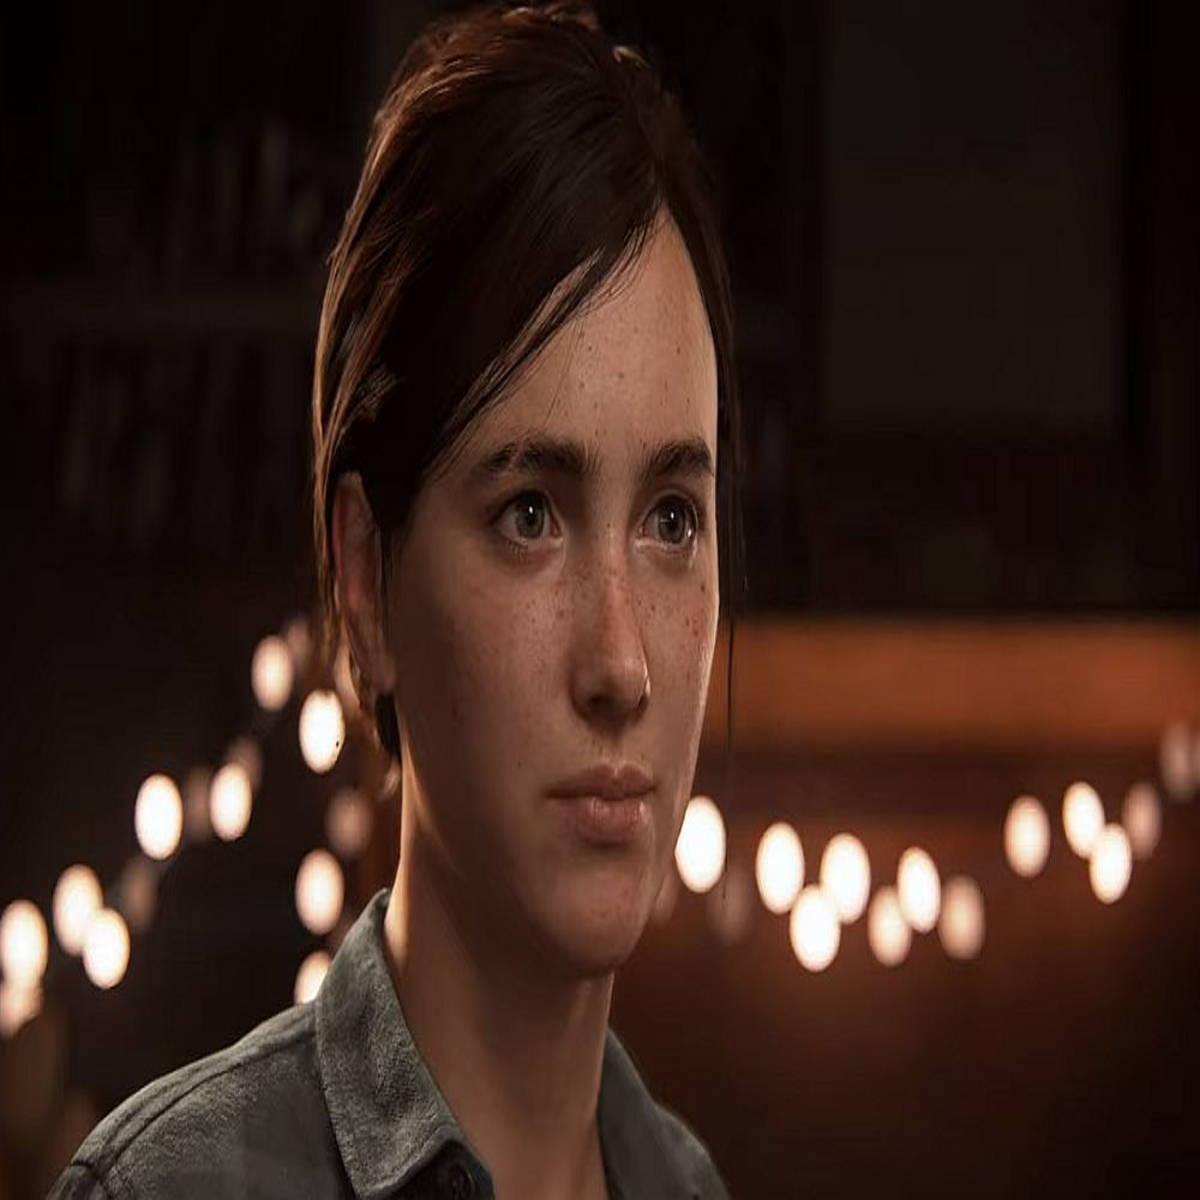 ELLIE FROM THE LAST OF US 2 just like please